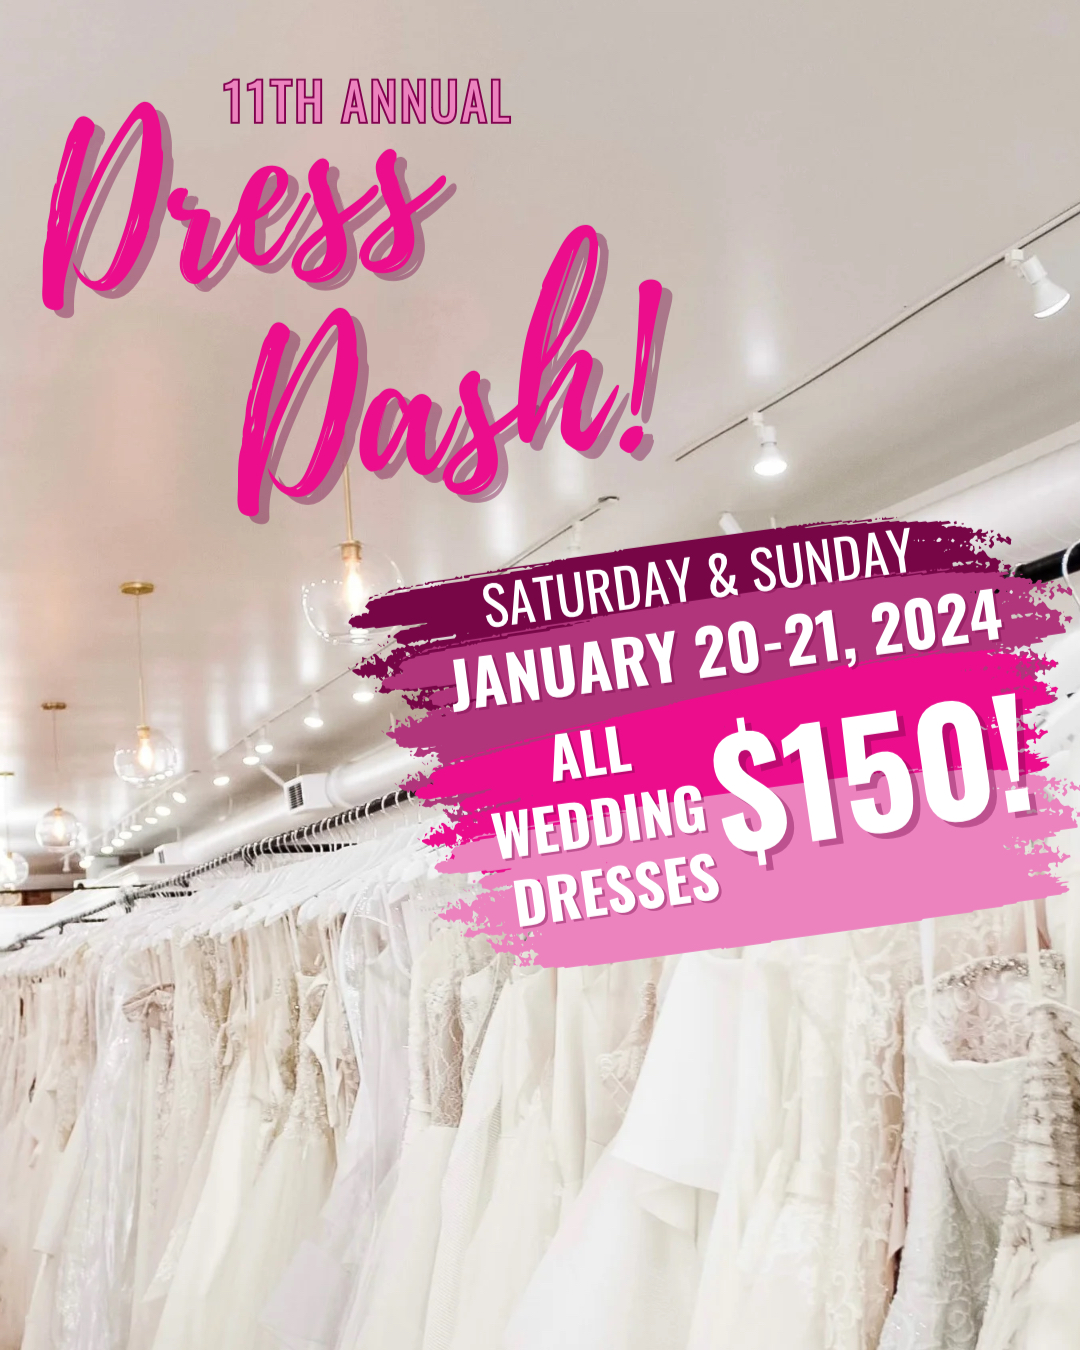 Welcome to the Dress Dash!